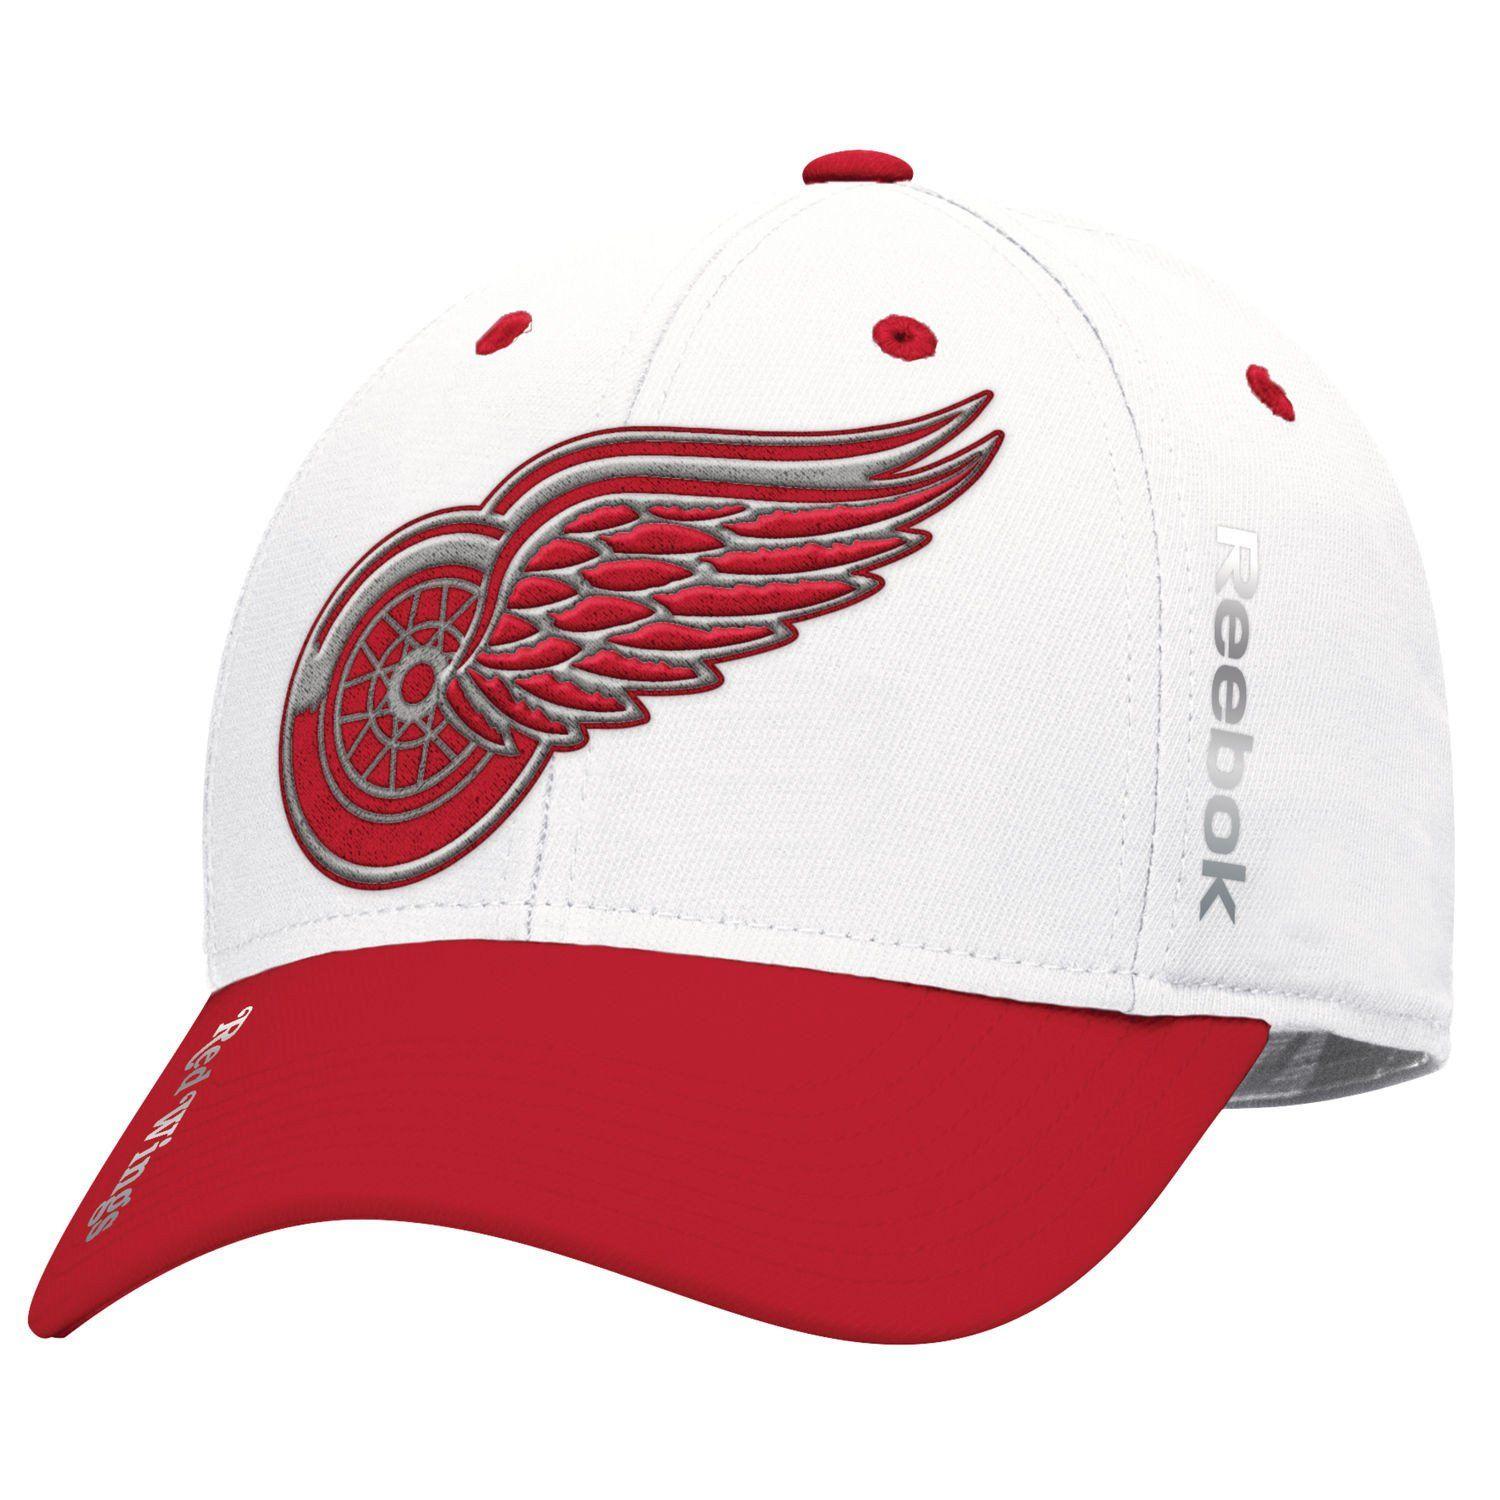 Classic Detroit Red Wings Logo - Detroit Red Wings Centennial Classic Coaches Structured Flex Cap ...